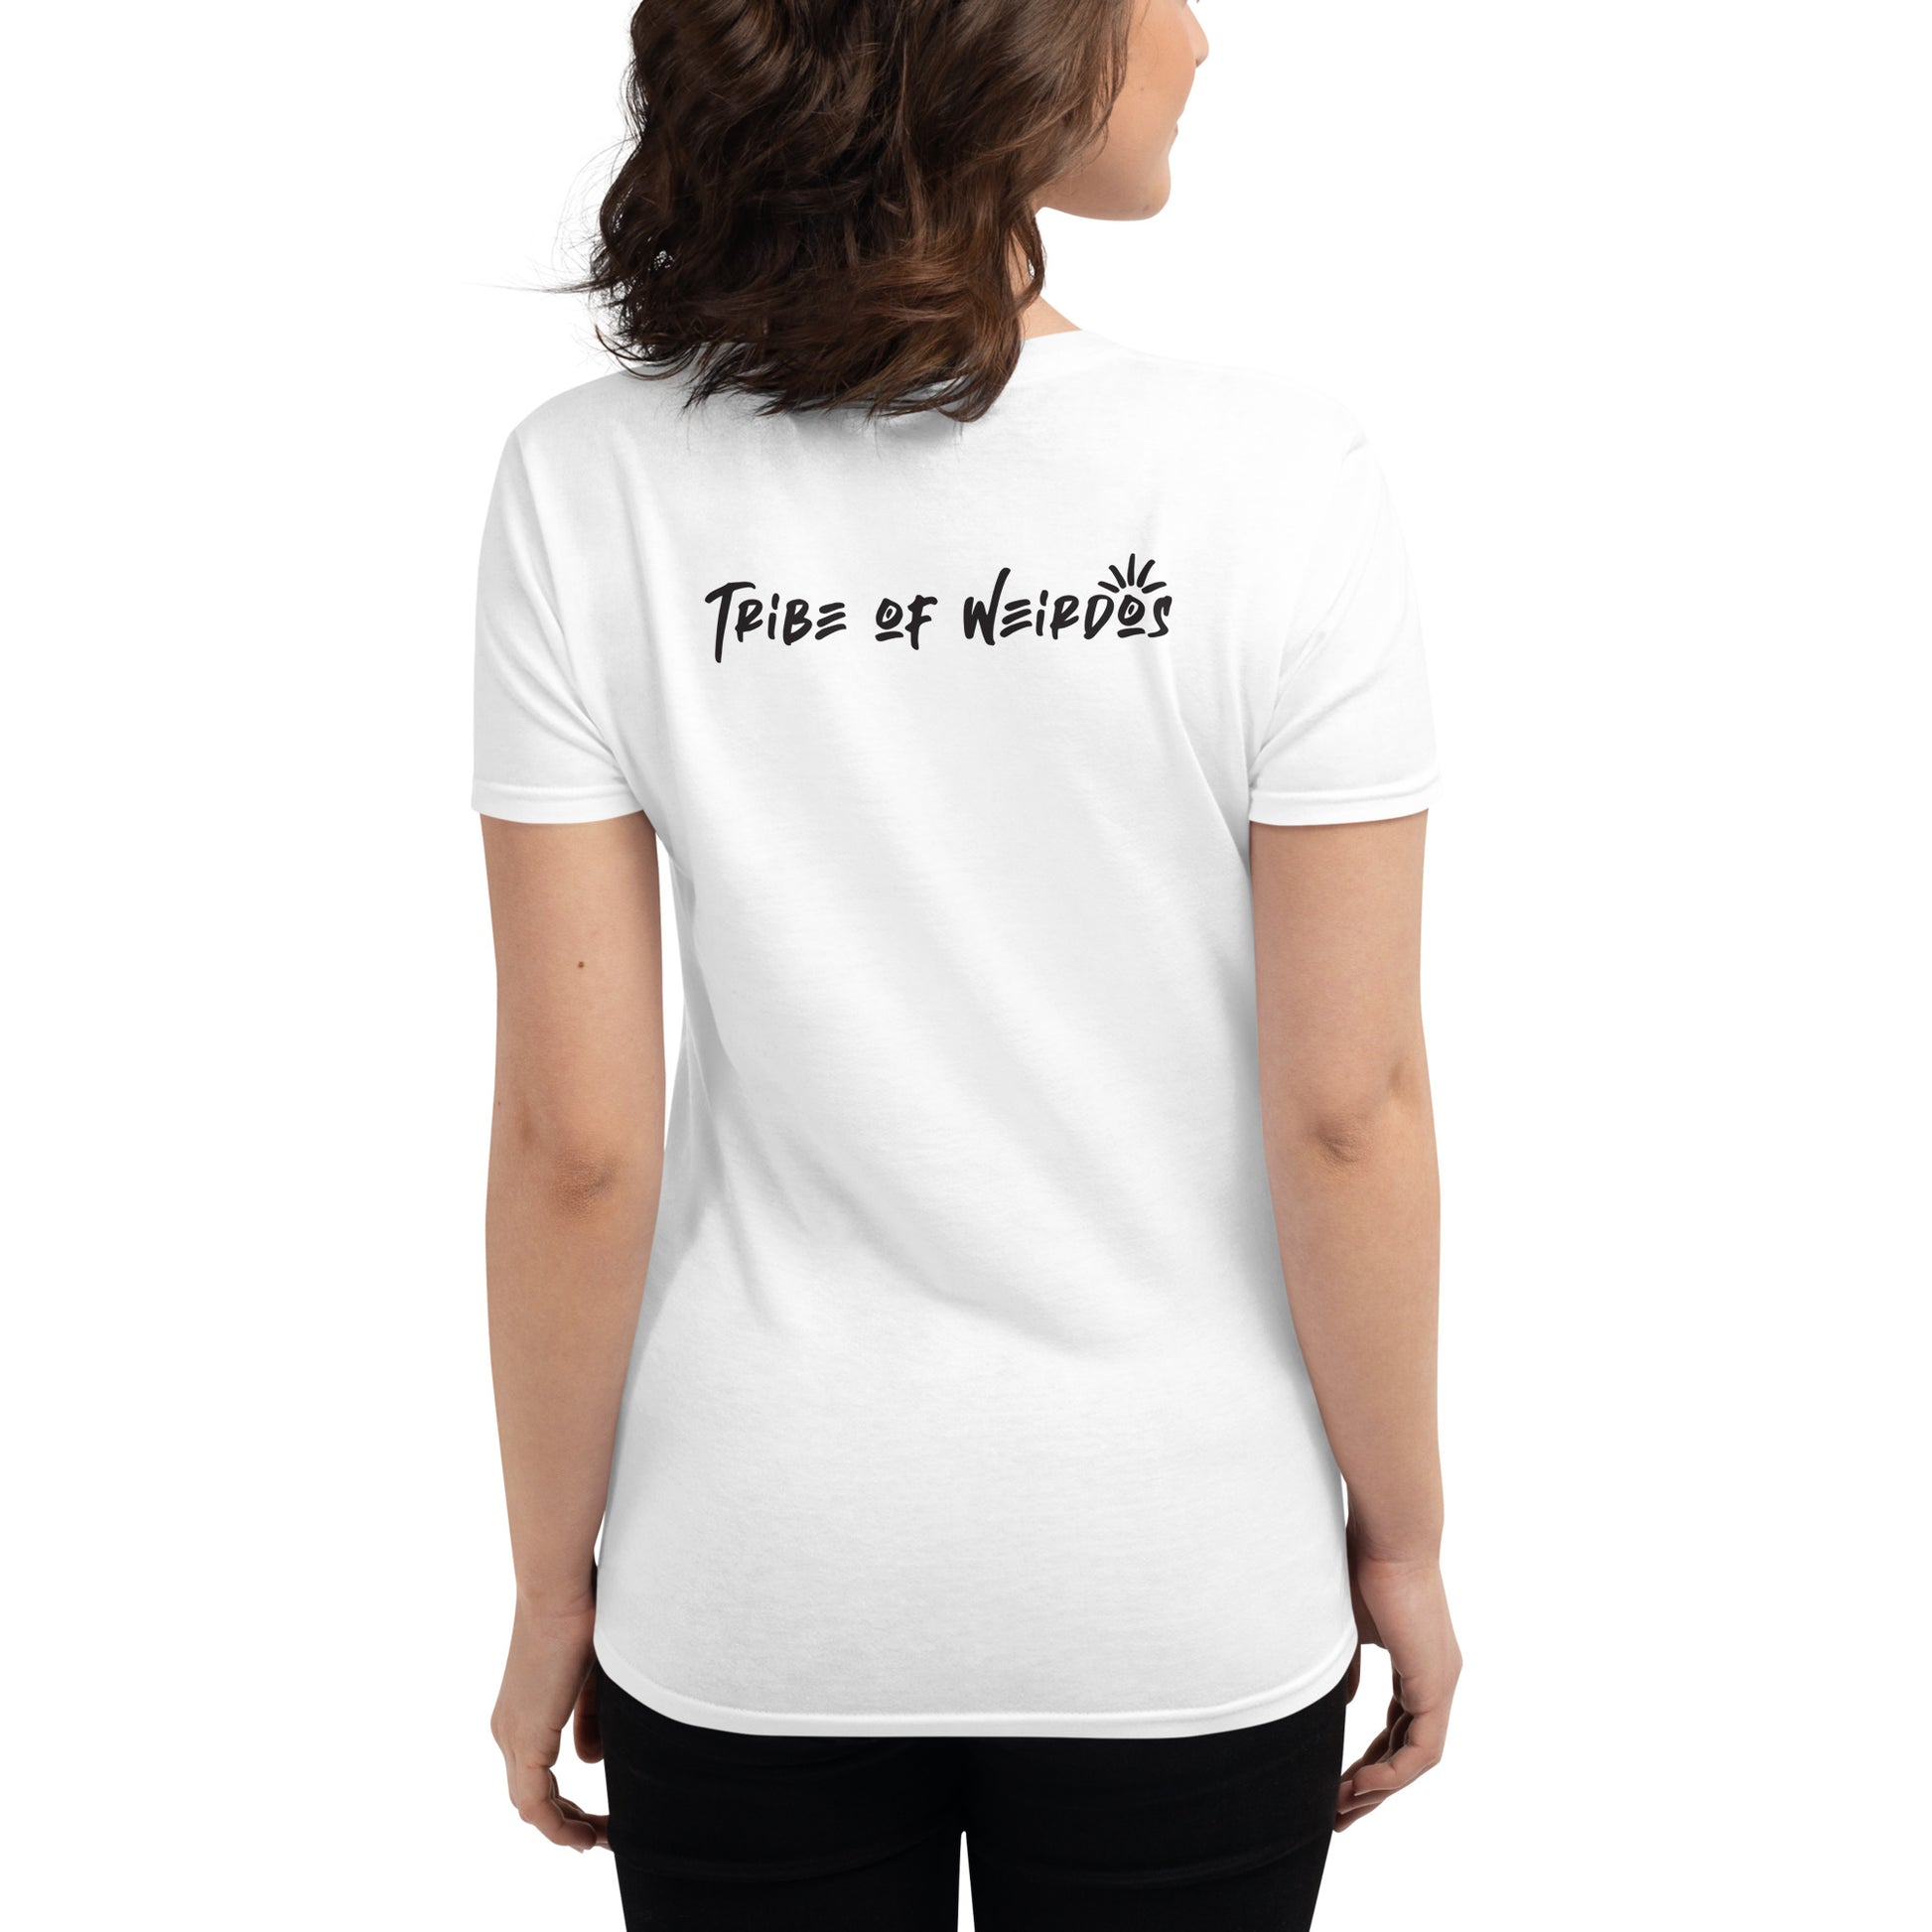 Protect Your Peace - Tribe of Weirdos Women's T-Shirt in black, showcasing bold white text and tribal design, symbolizing unity and personal empowerment.